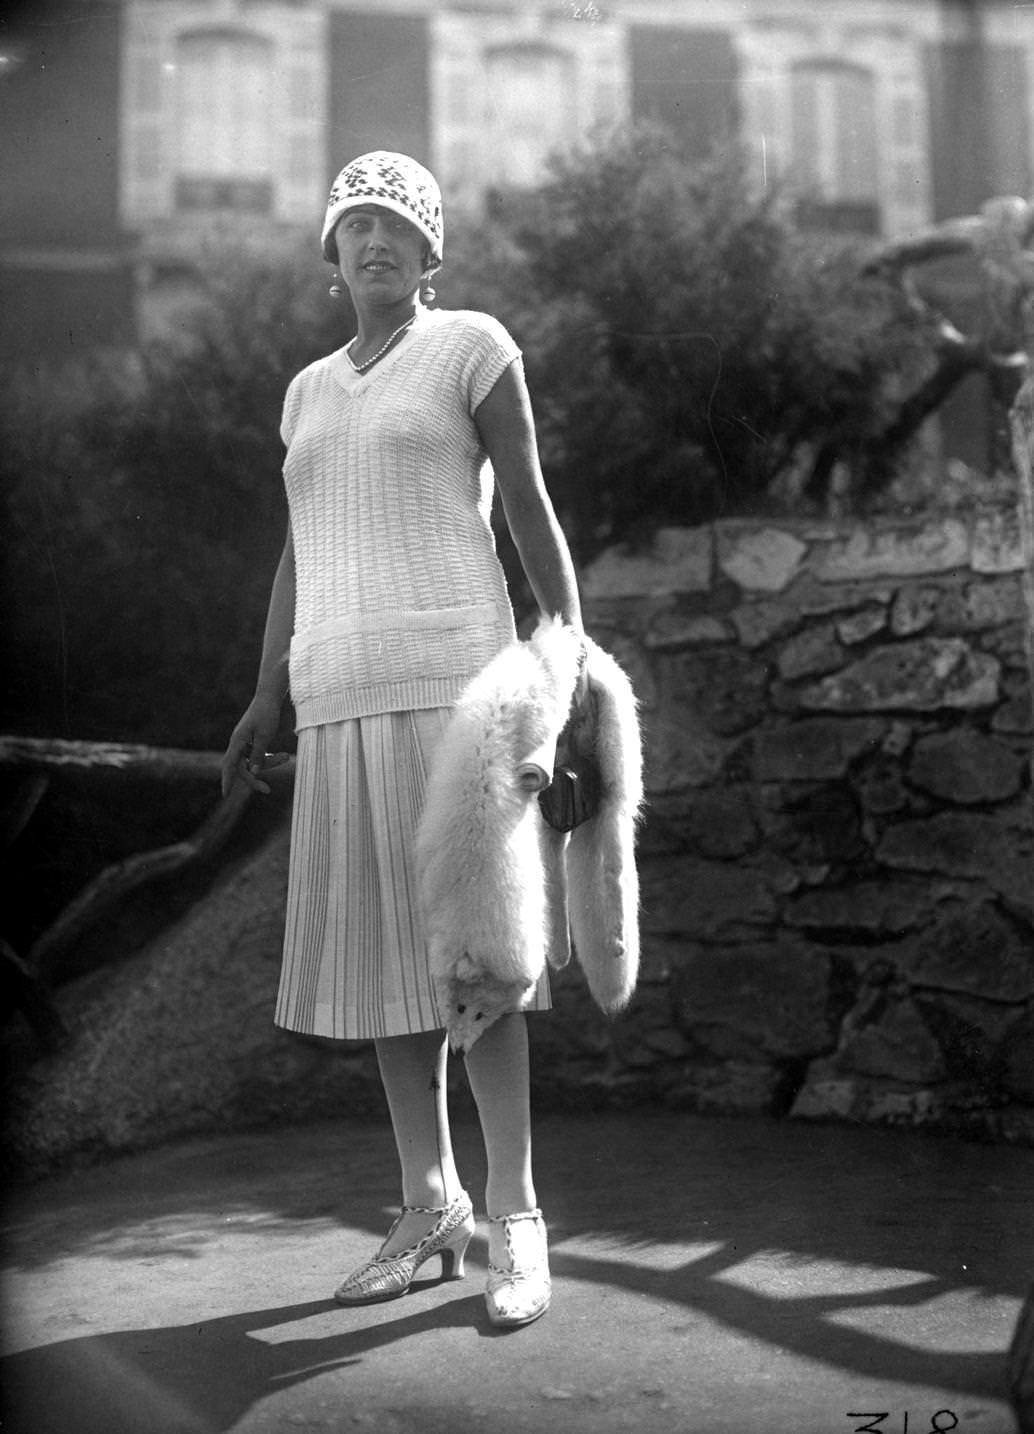 Cap sleeved v-necked jumper worn with a pleated skirt, knitted cloche hat and t-bar high-heeled shoes. Accessories include a white fox fur,short single-strand pearl necklace, and drop earrings, 1925